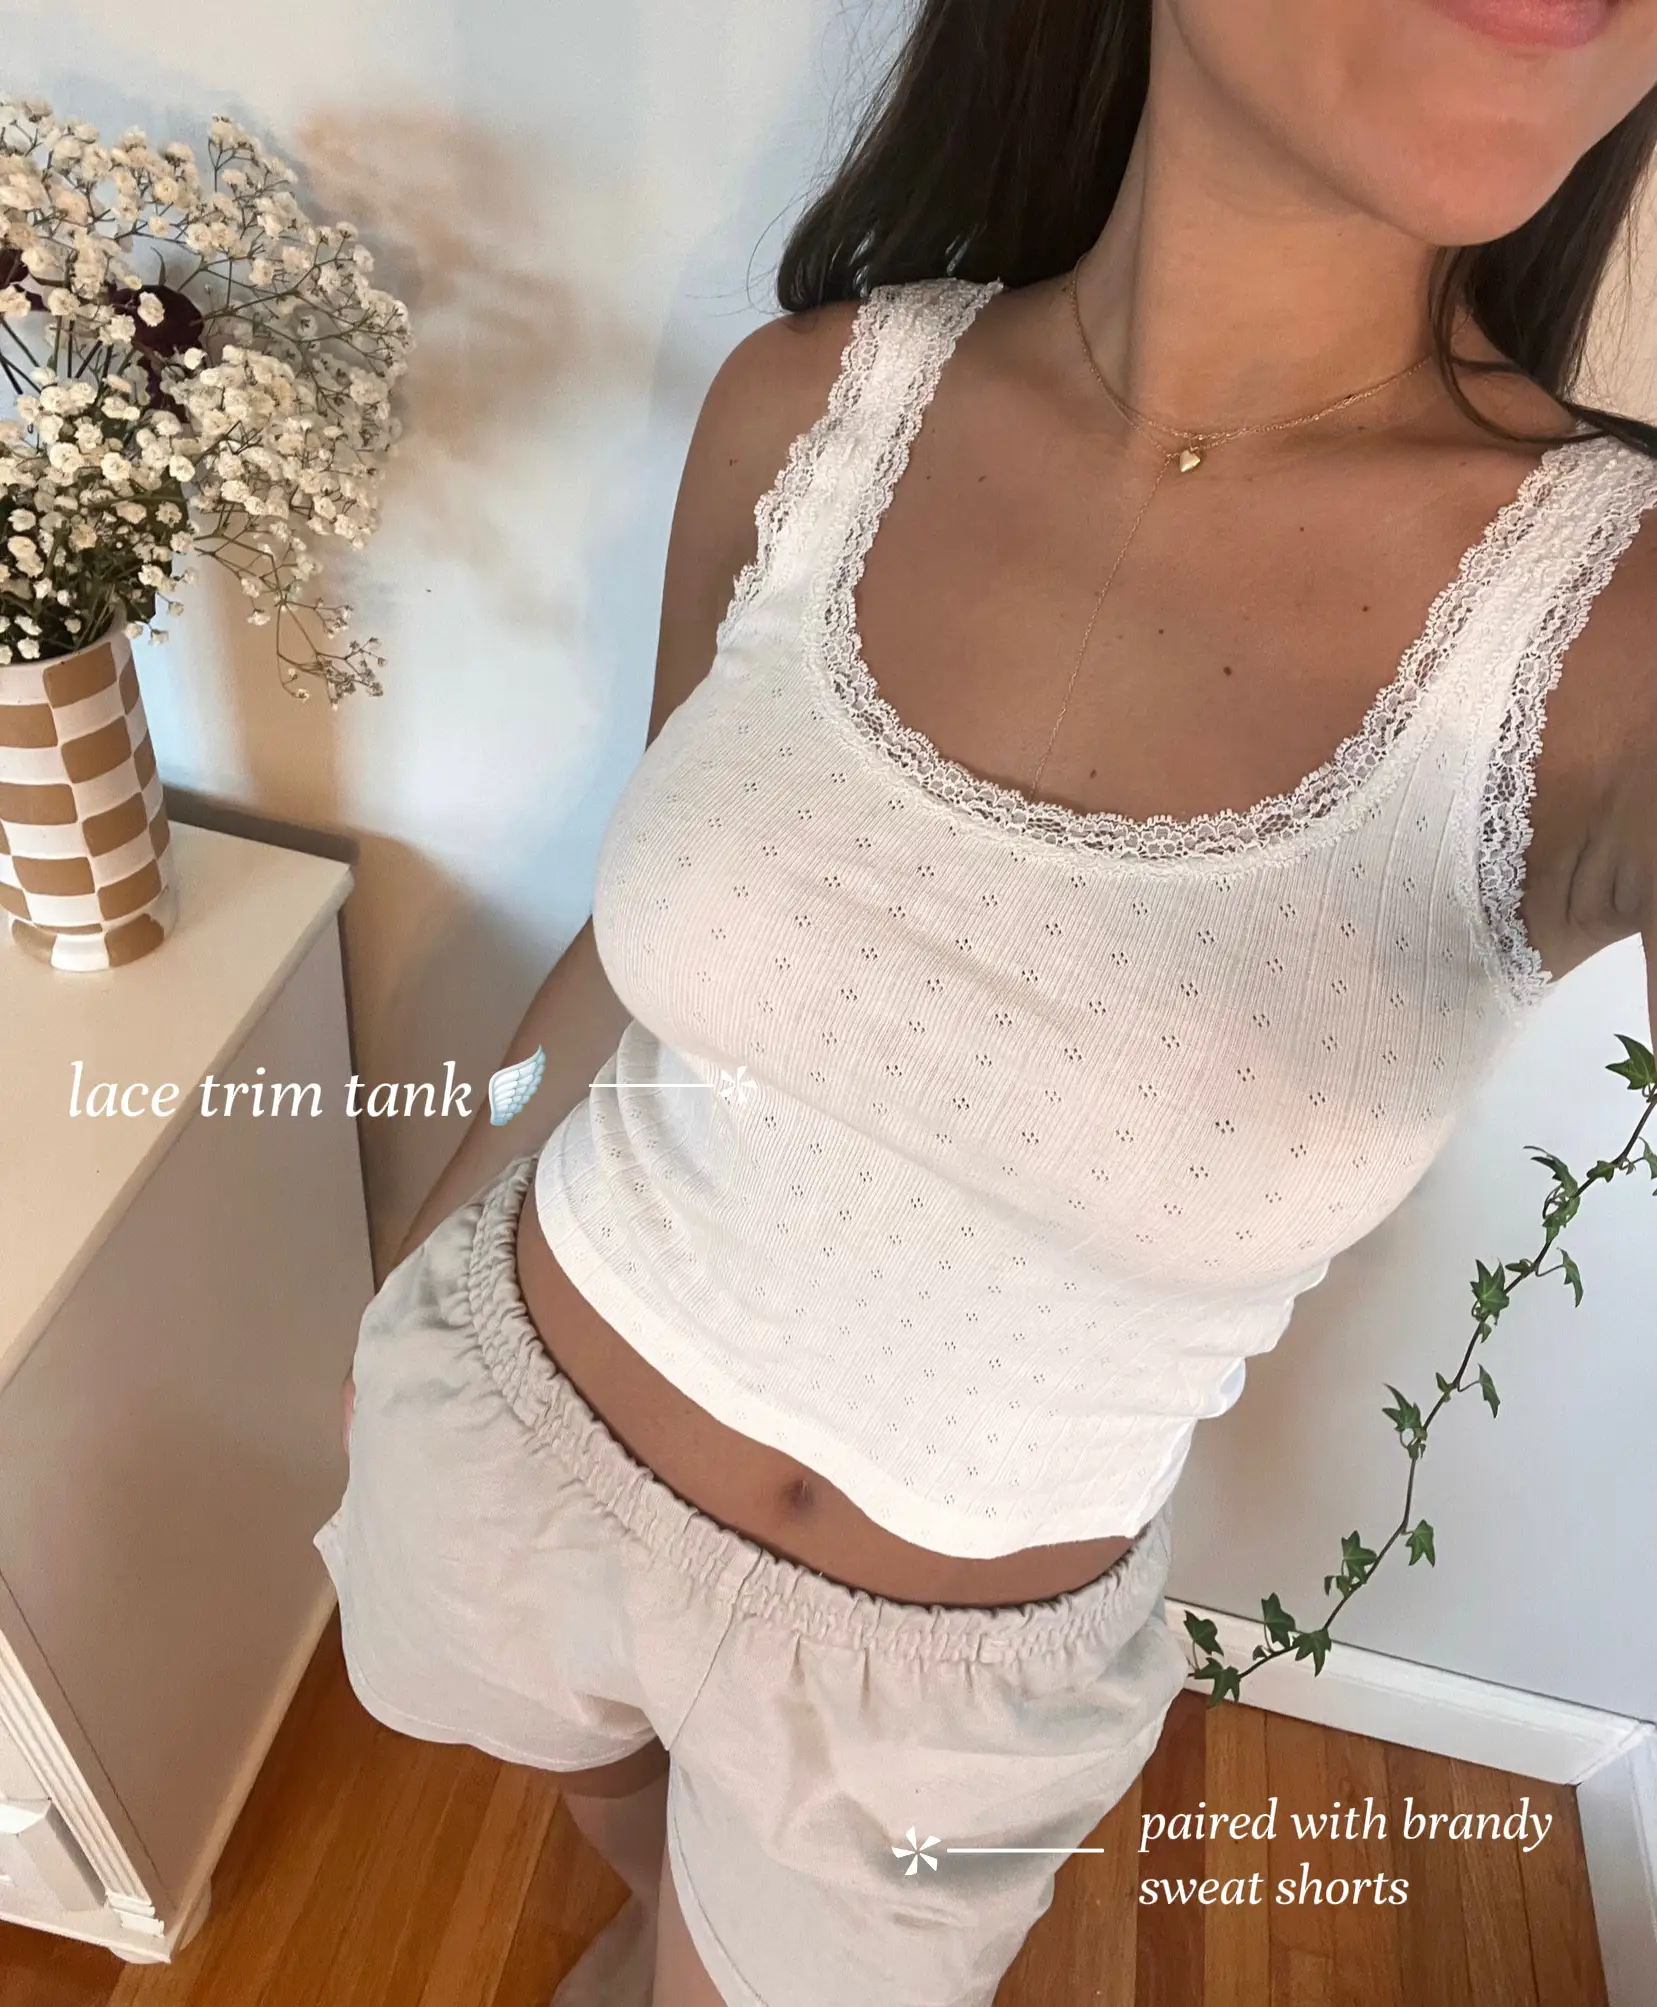 Brandy Melville Lace Top White - $23 - From emily